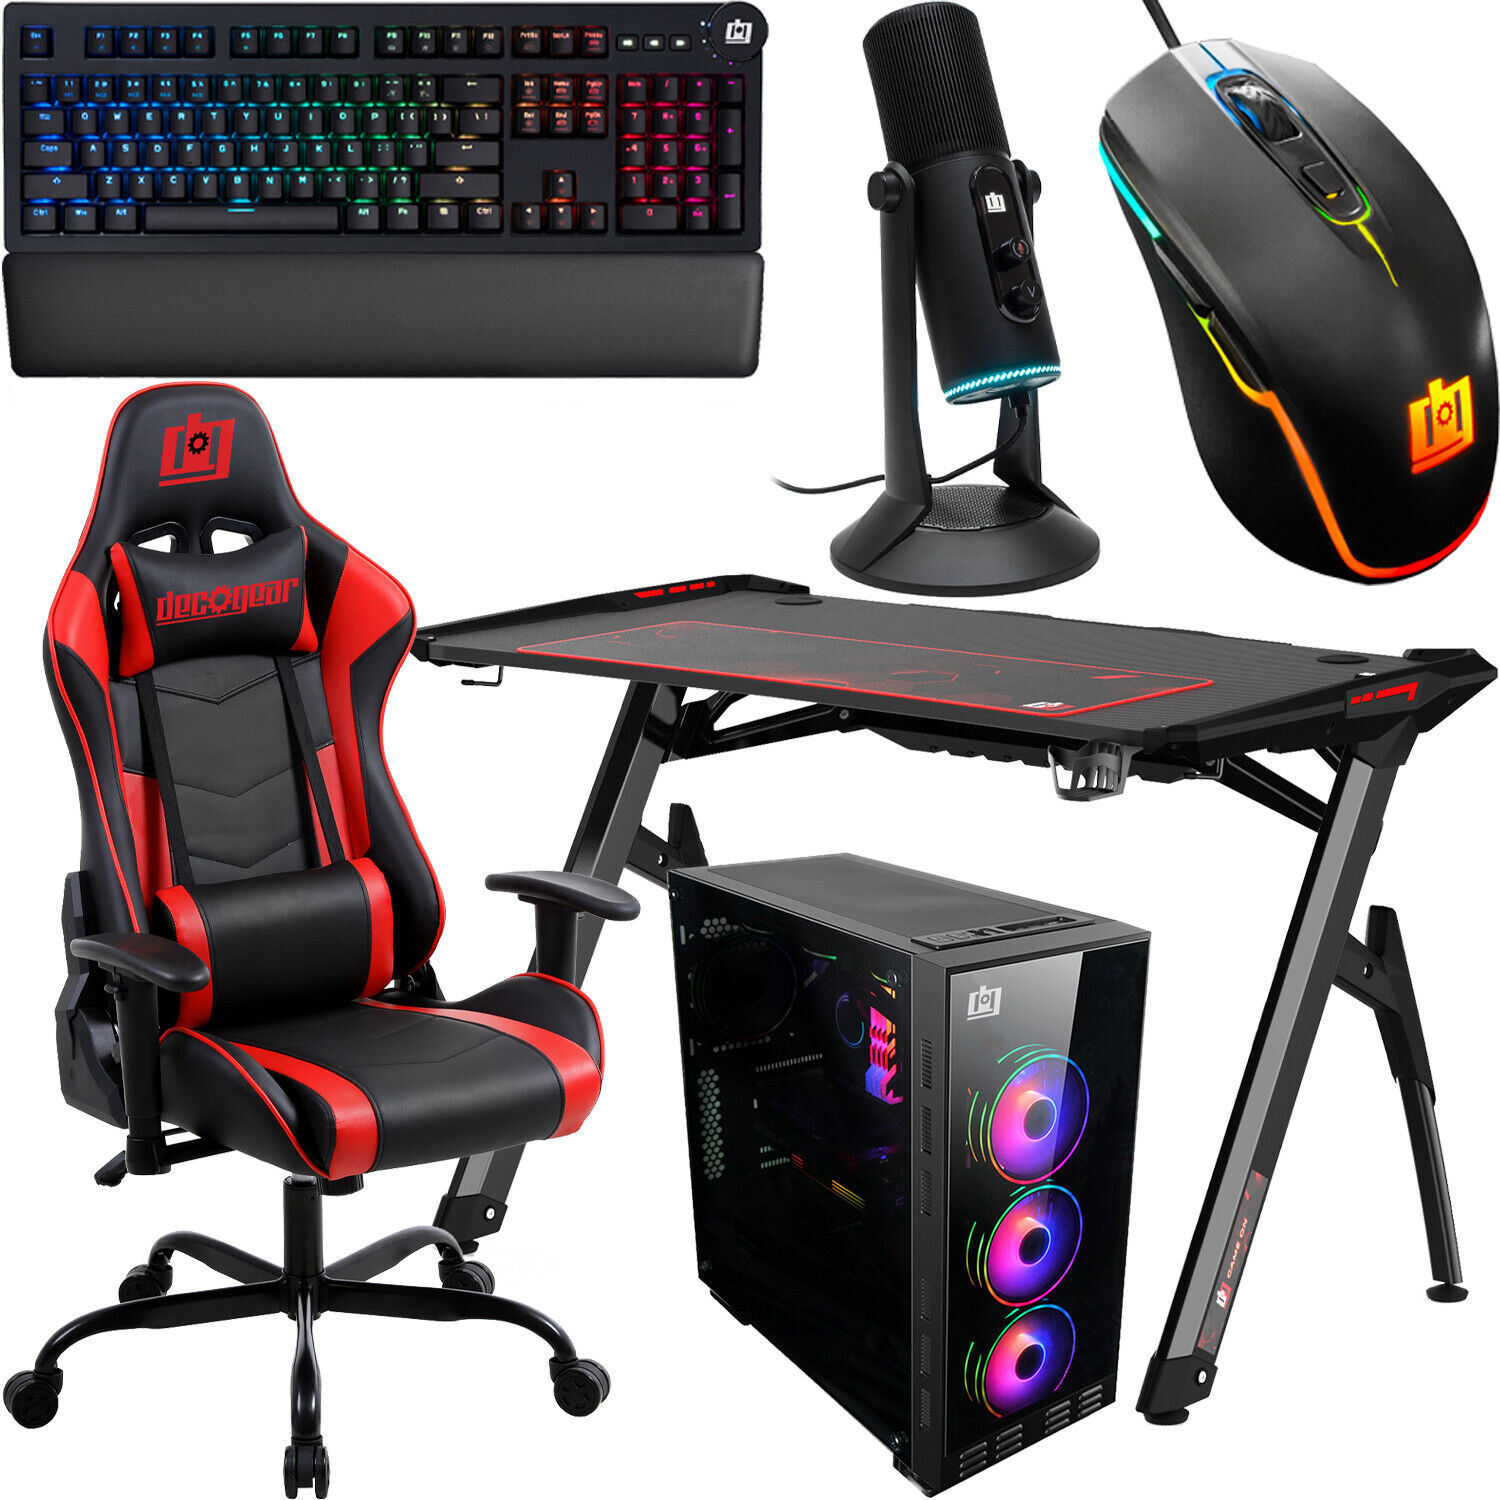 Deco Gear PC Gaming Kit, LED Desk, Chair, Case, Mechanical Keyboard, LED Mouse